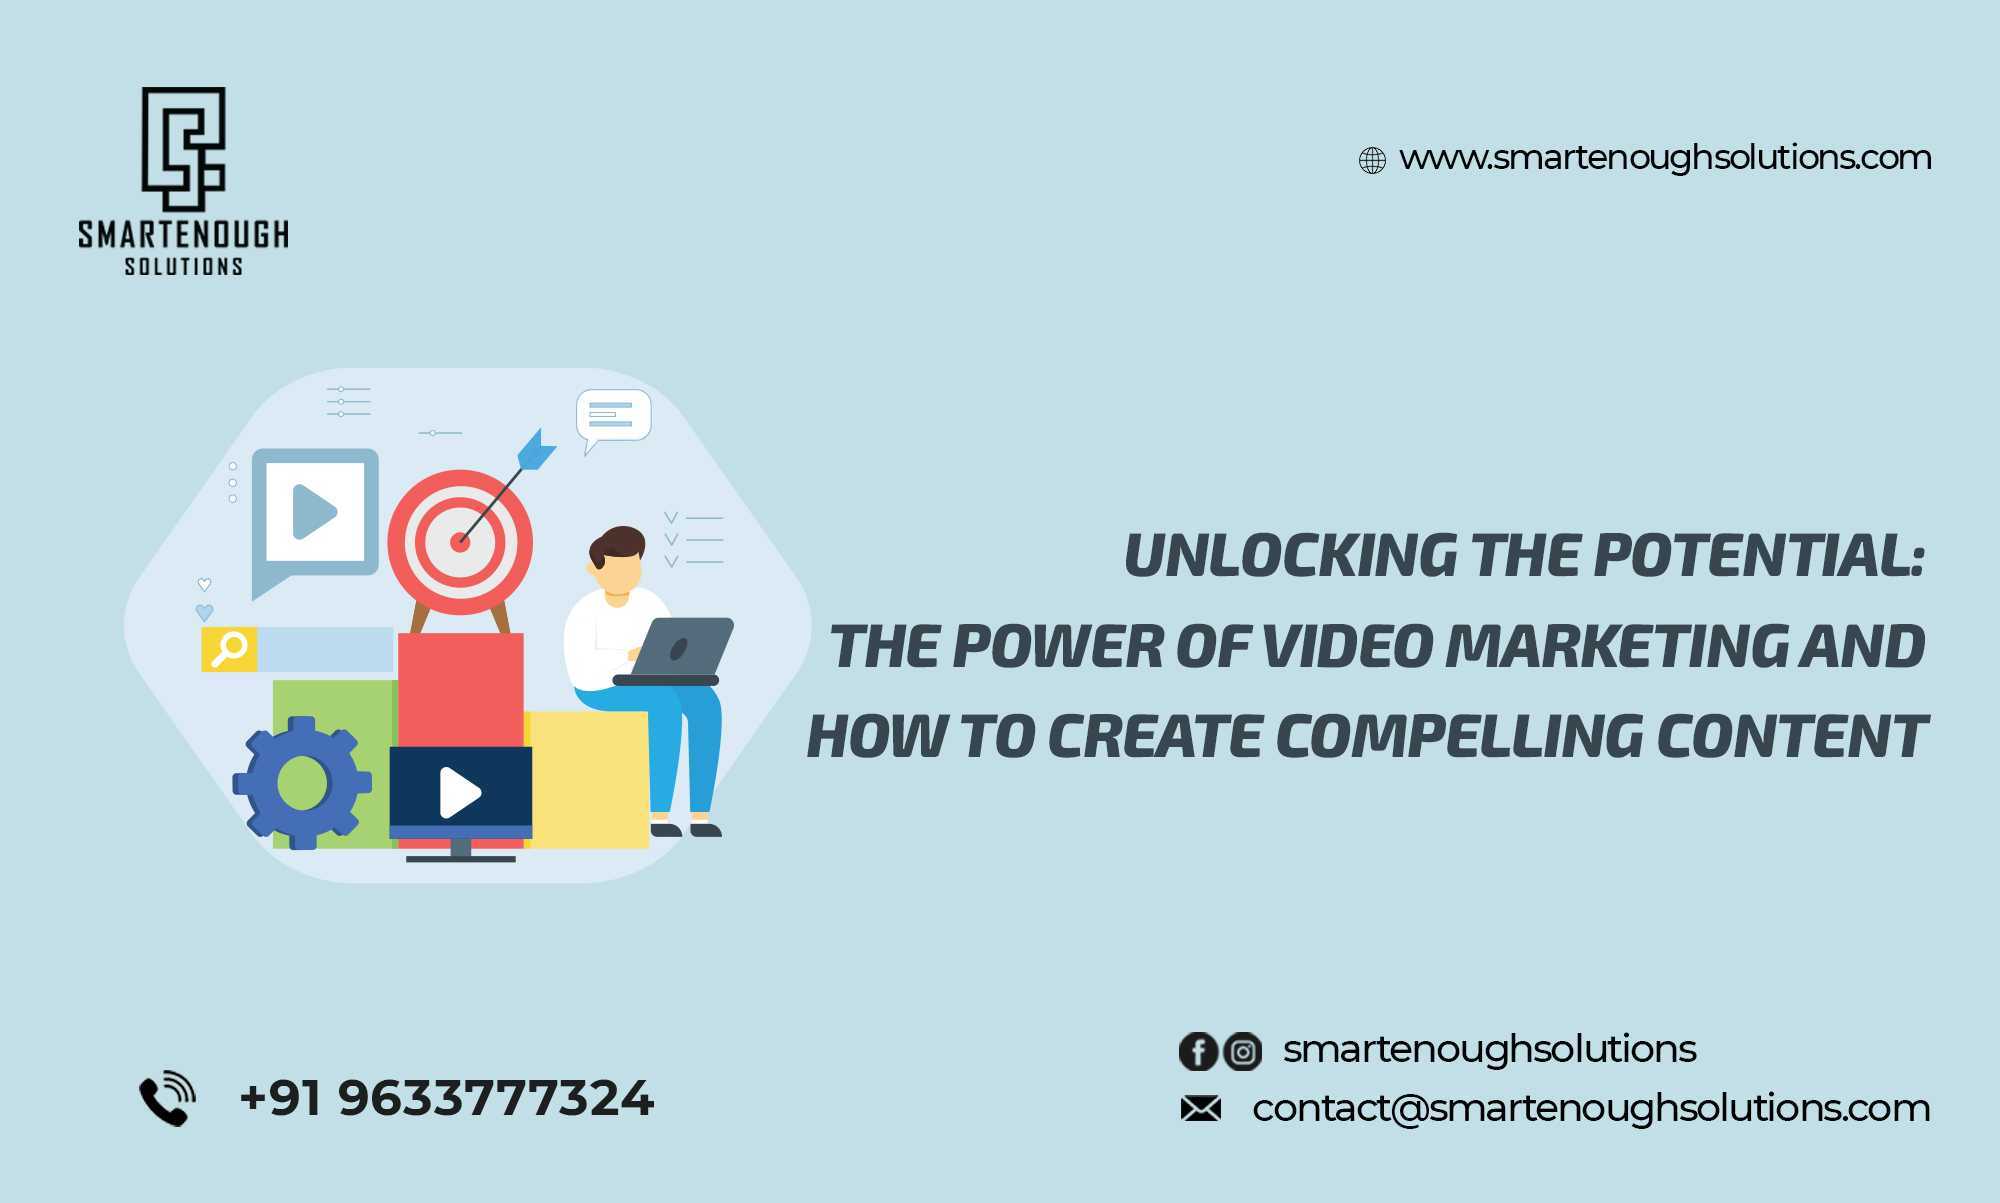 Unlocking the Potential: The Power of Video Marketing and How to Create Compelling Content